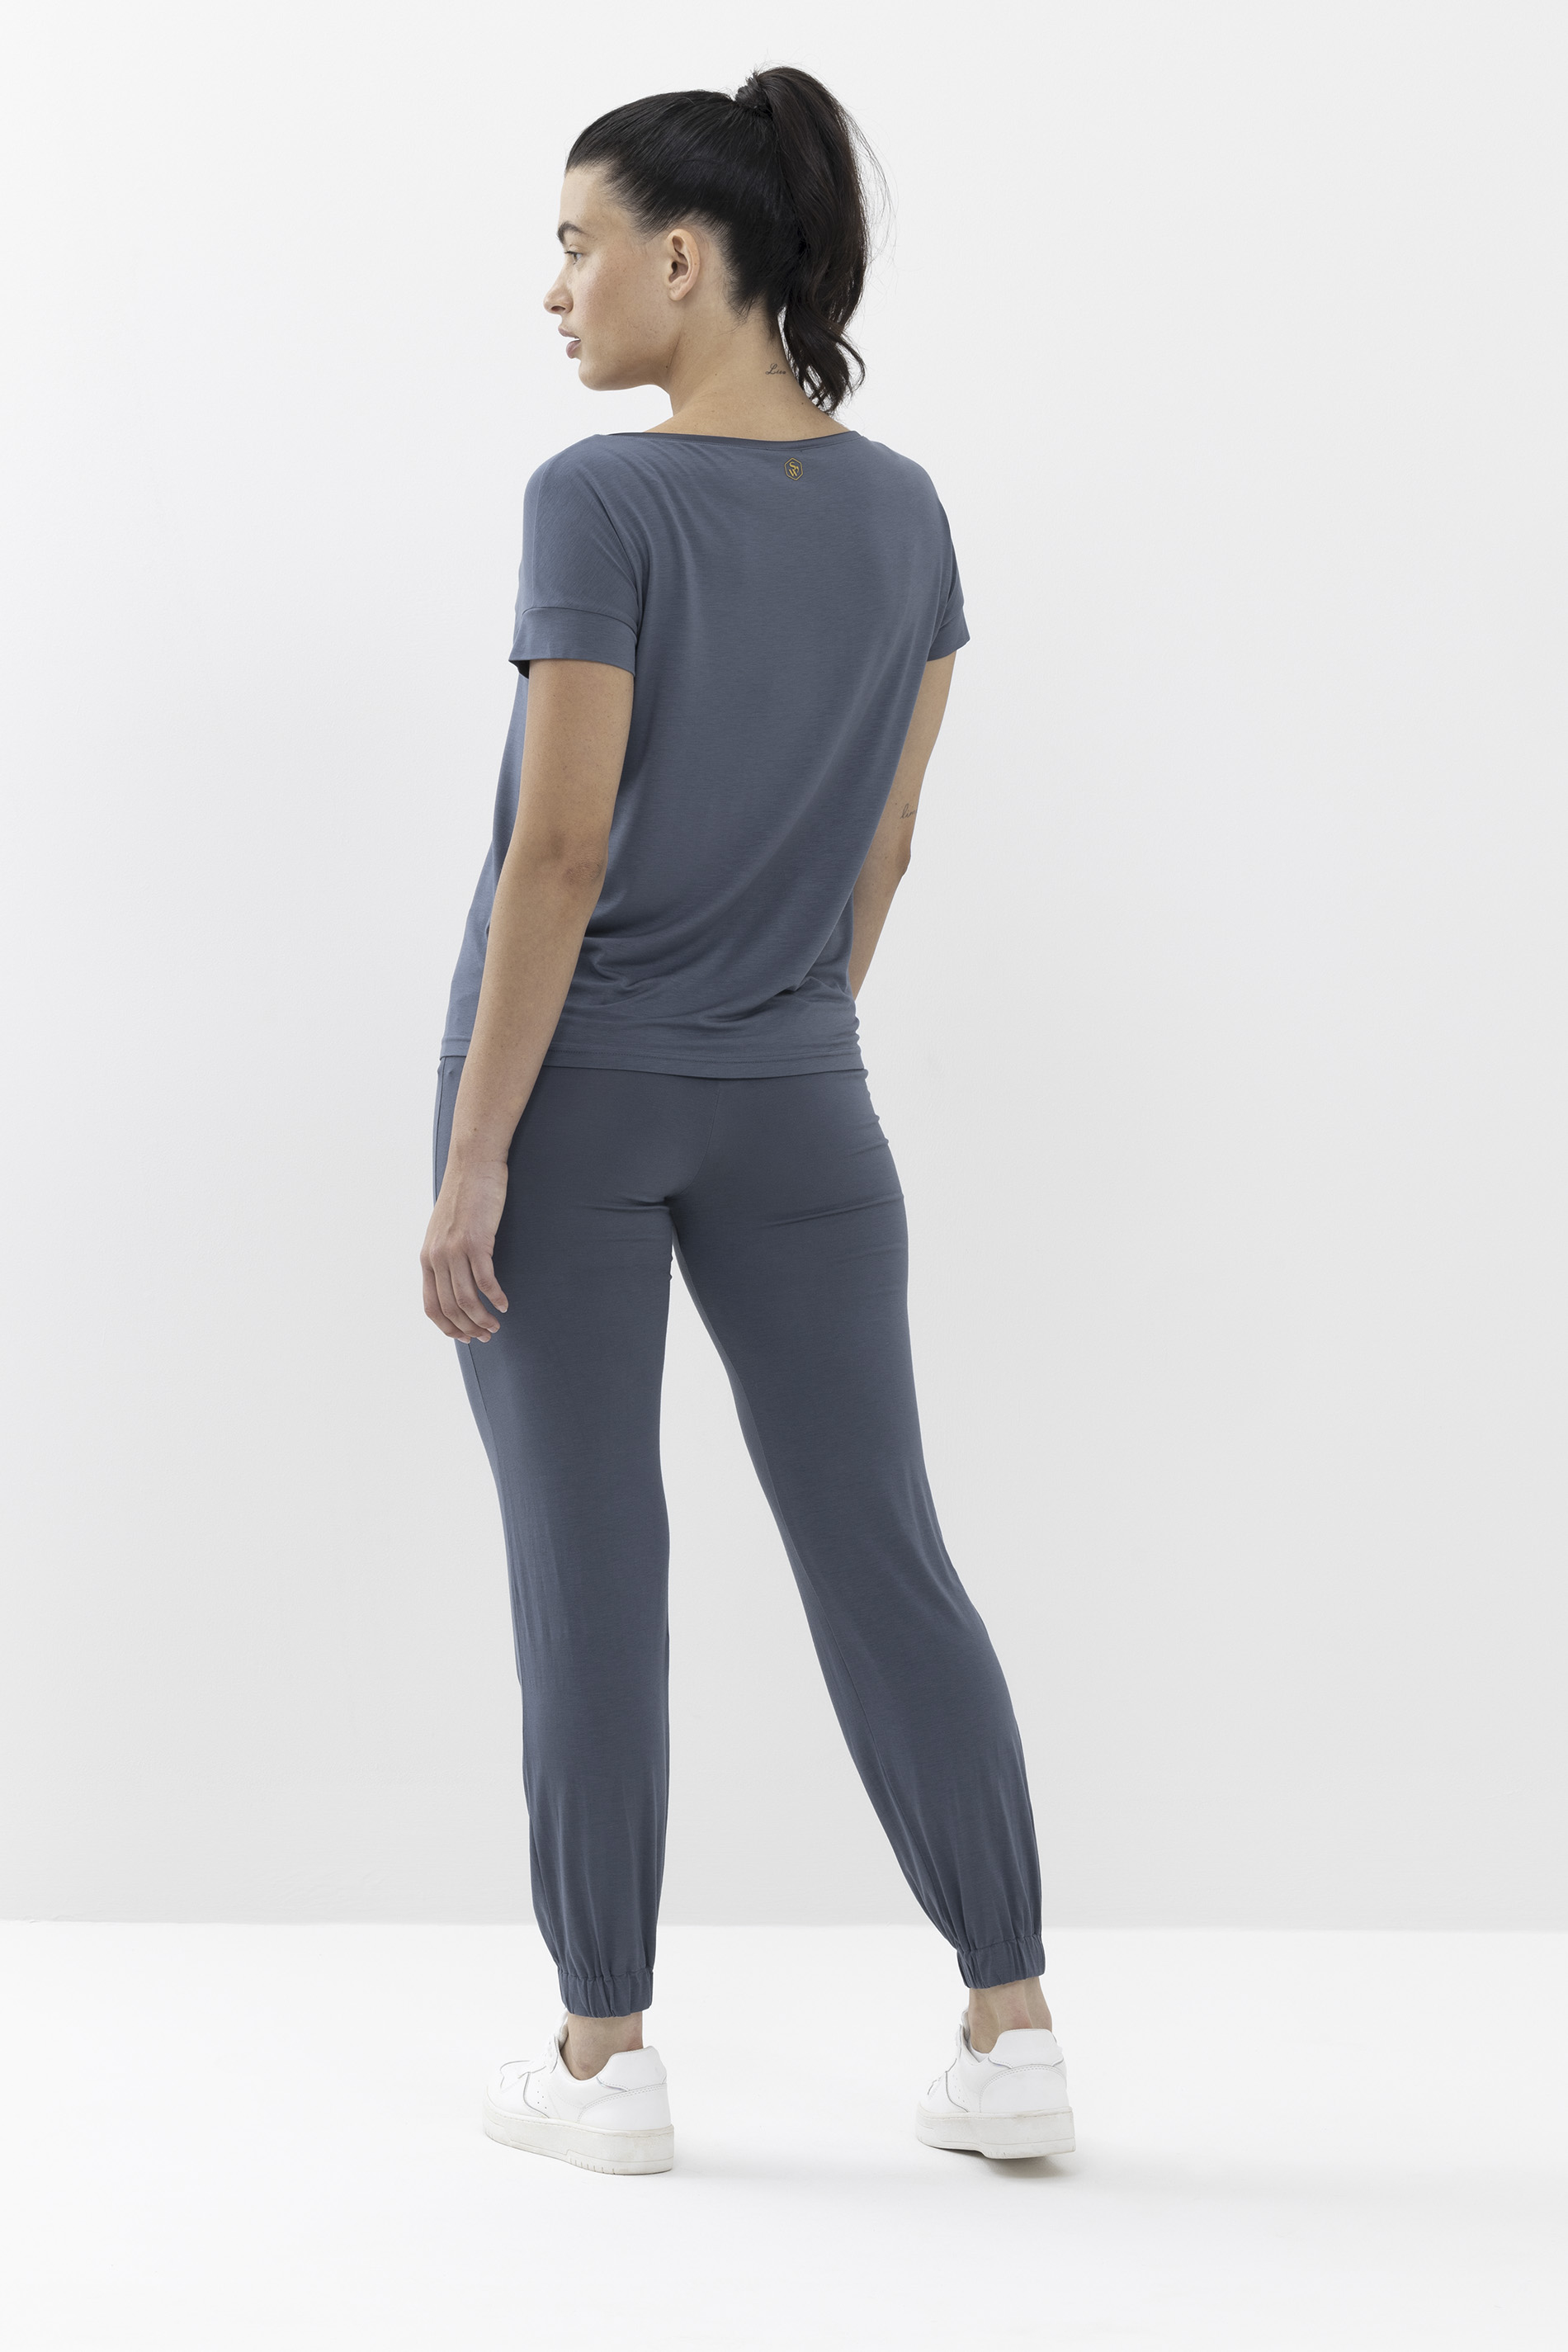 Yoga pants ankle-length Carbon Serie Breathable Rear View | mey®